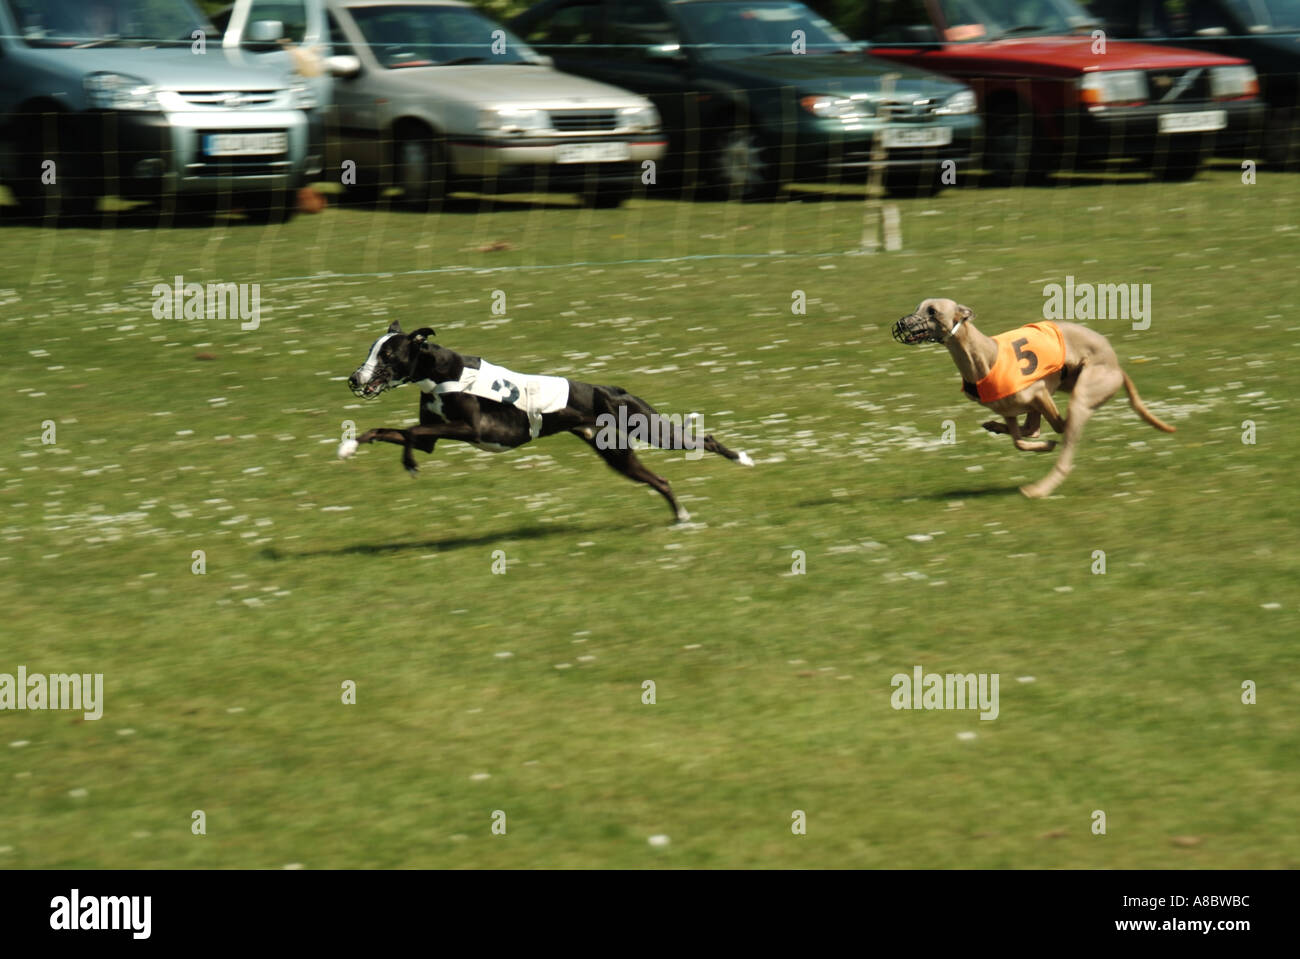 England dog show event whippet racing Stock Photo